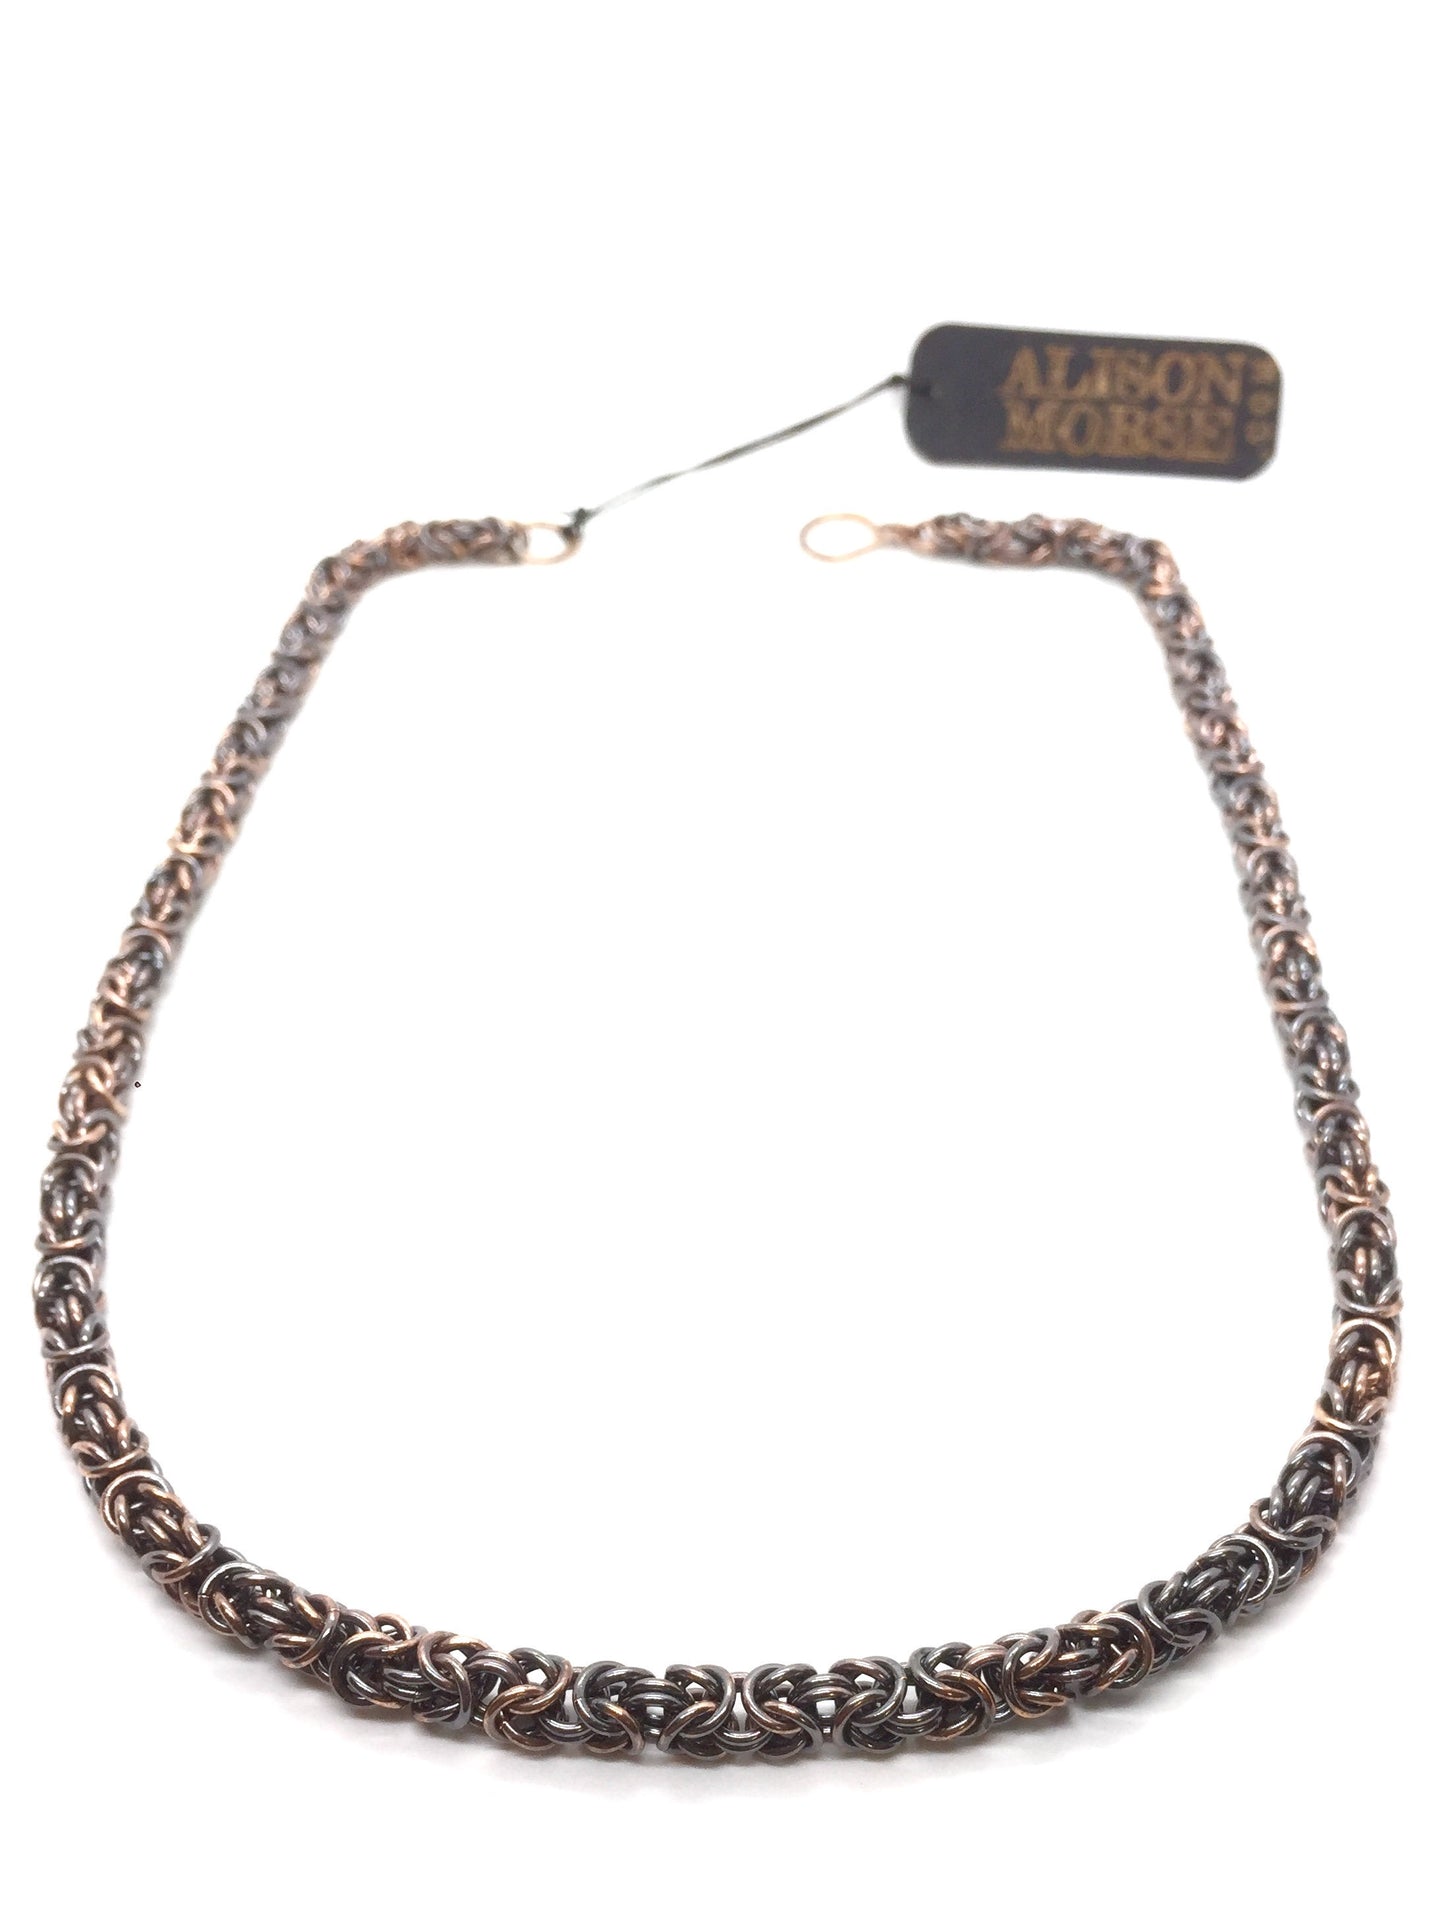 Byzantine Chainmaille Necklace in Oxidized Copper